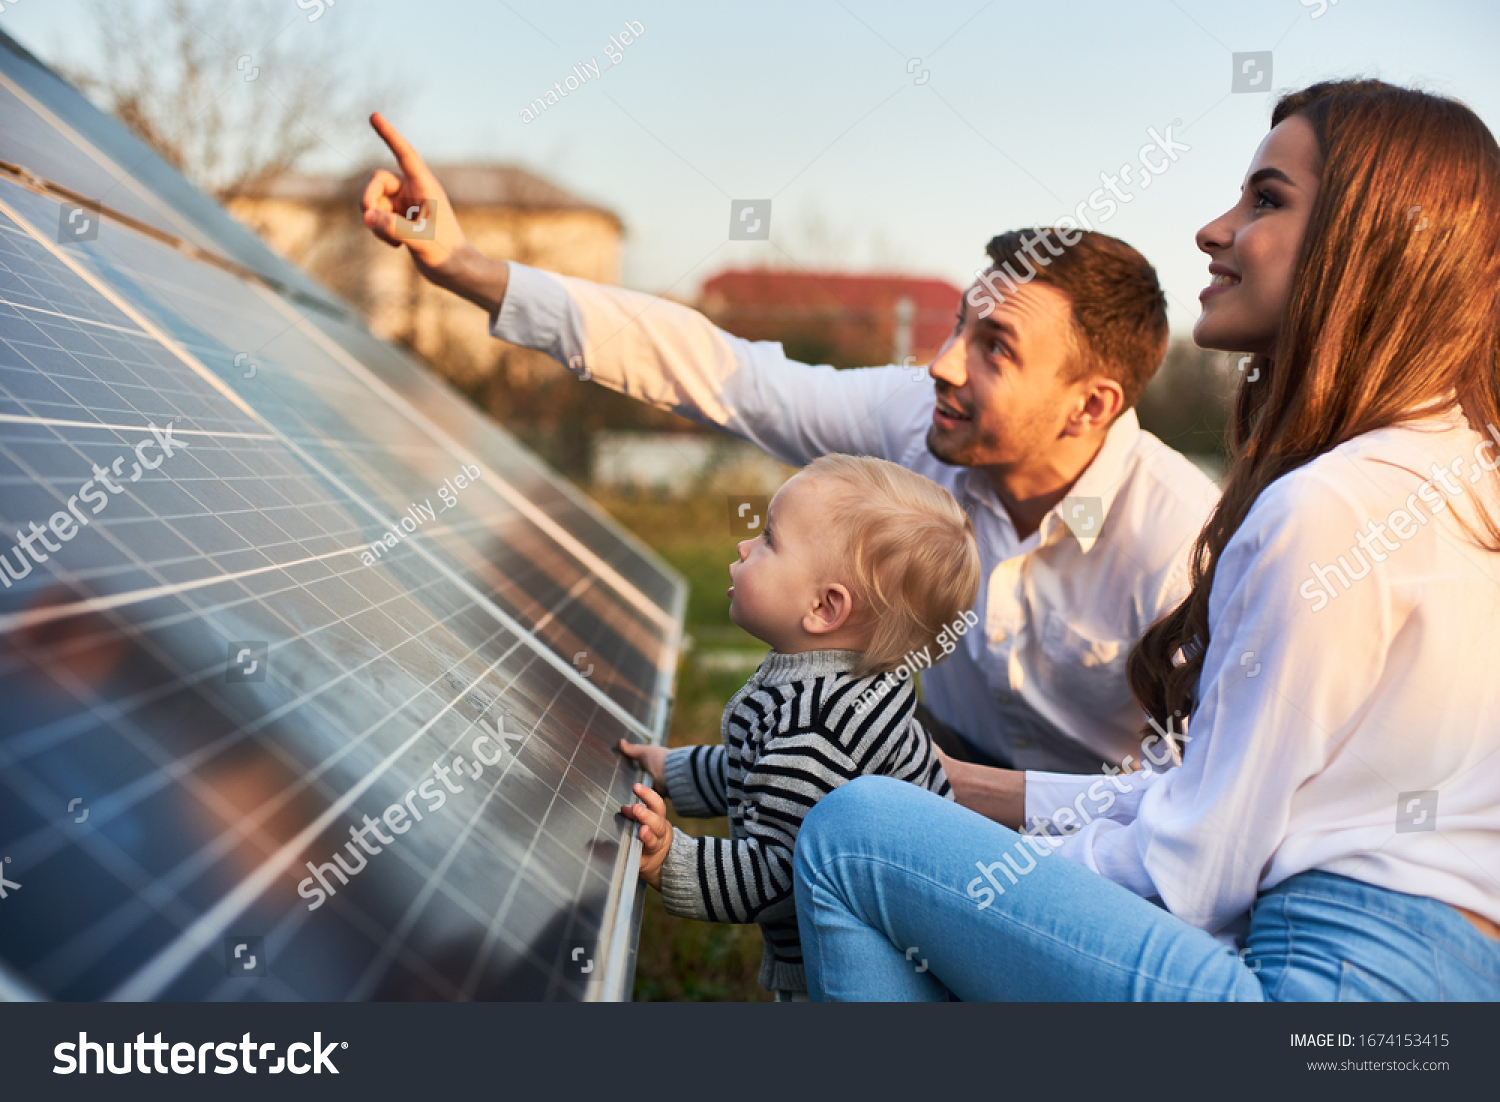 Man shows his family the solar panels on the plot near the house during a warm day. Young woman with a kid and a man in the sun rays look at the solar panels. #1674153415